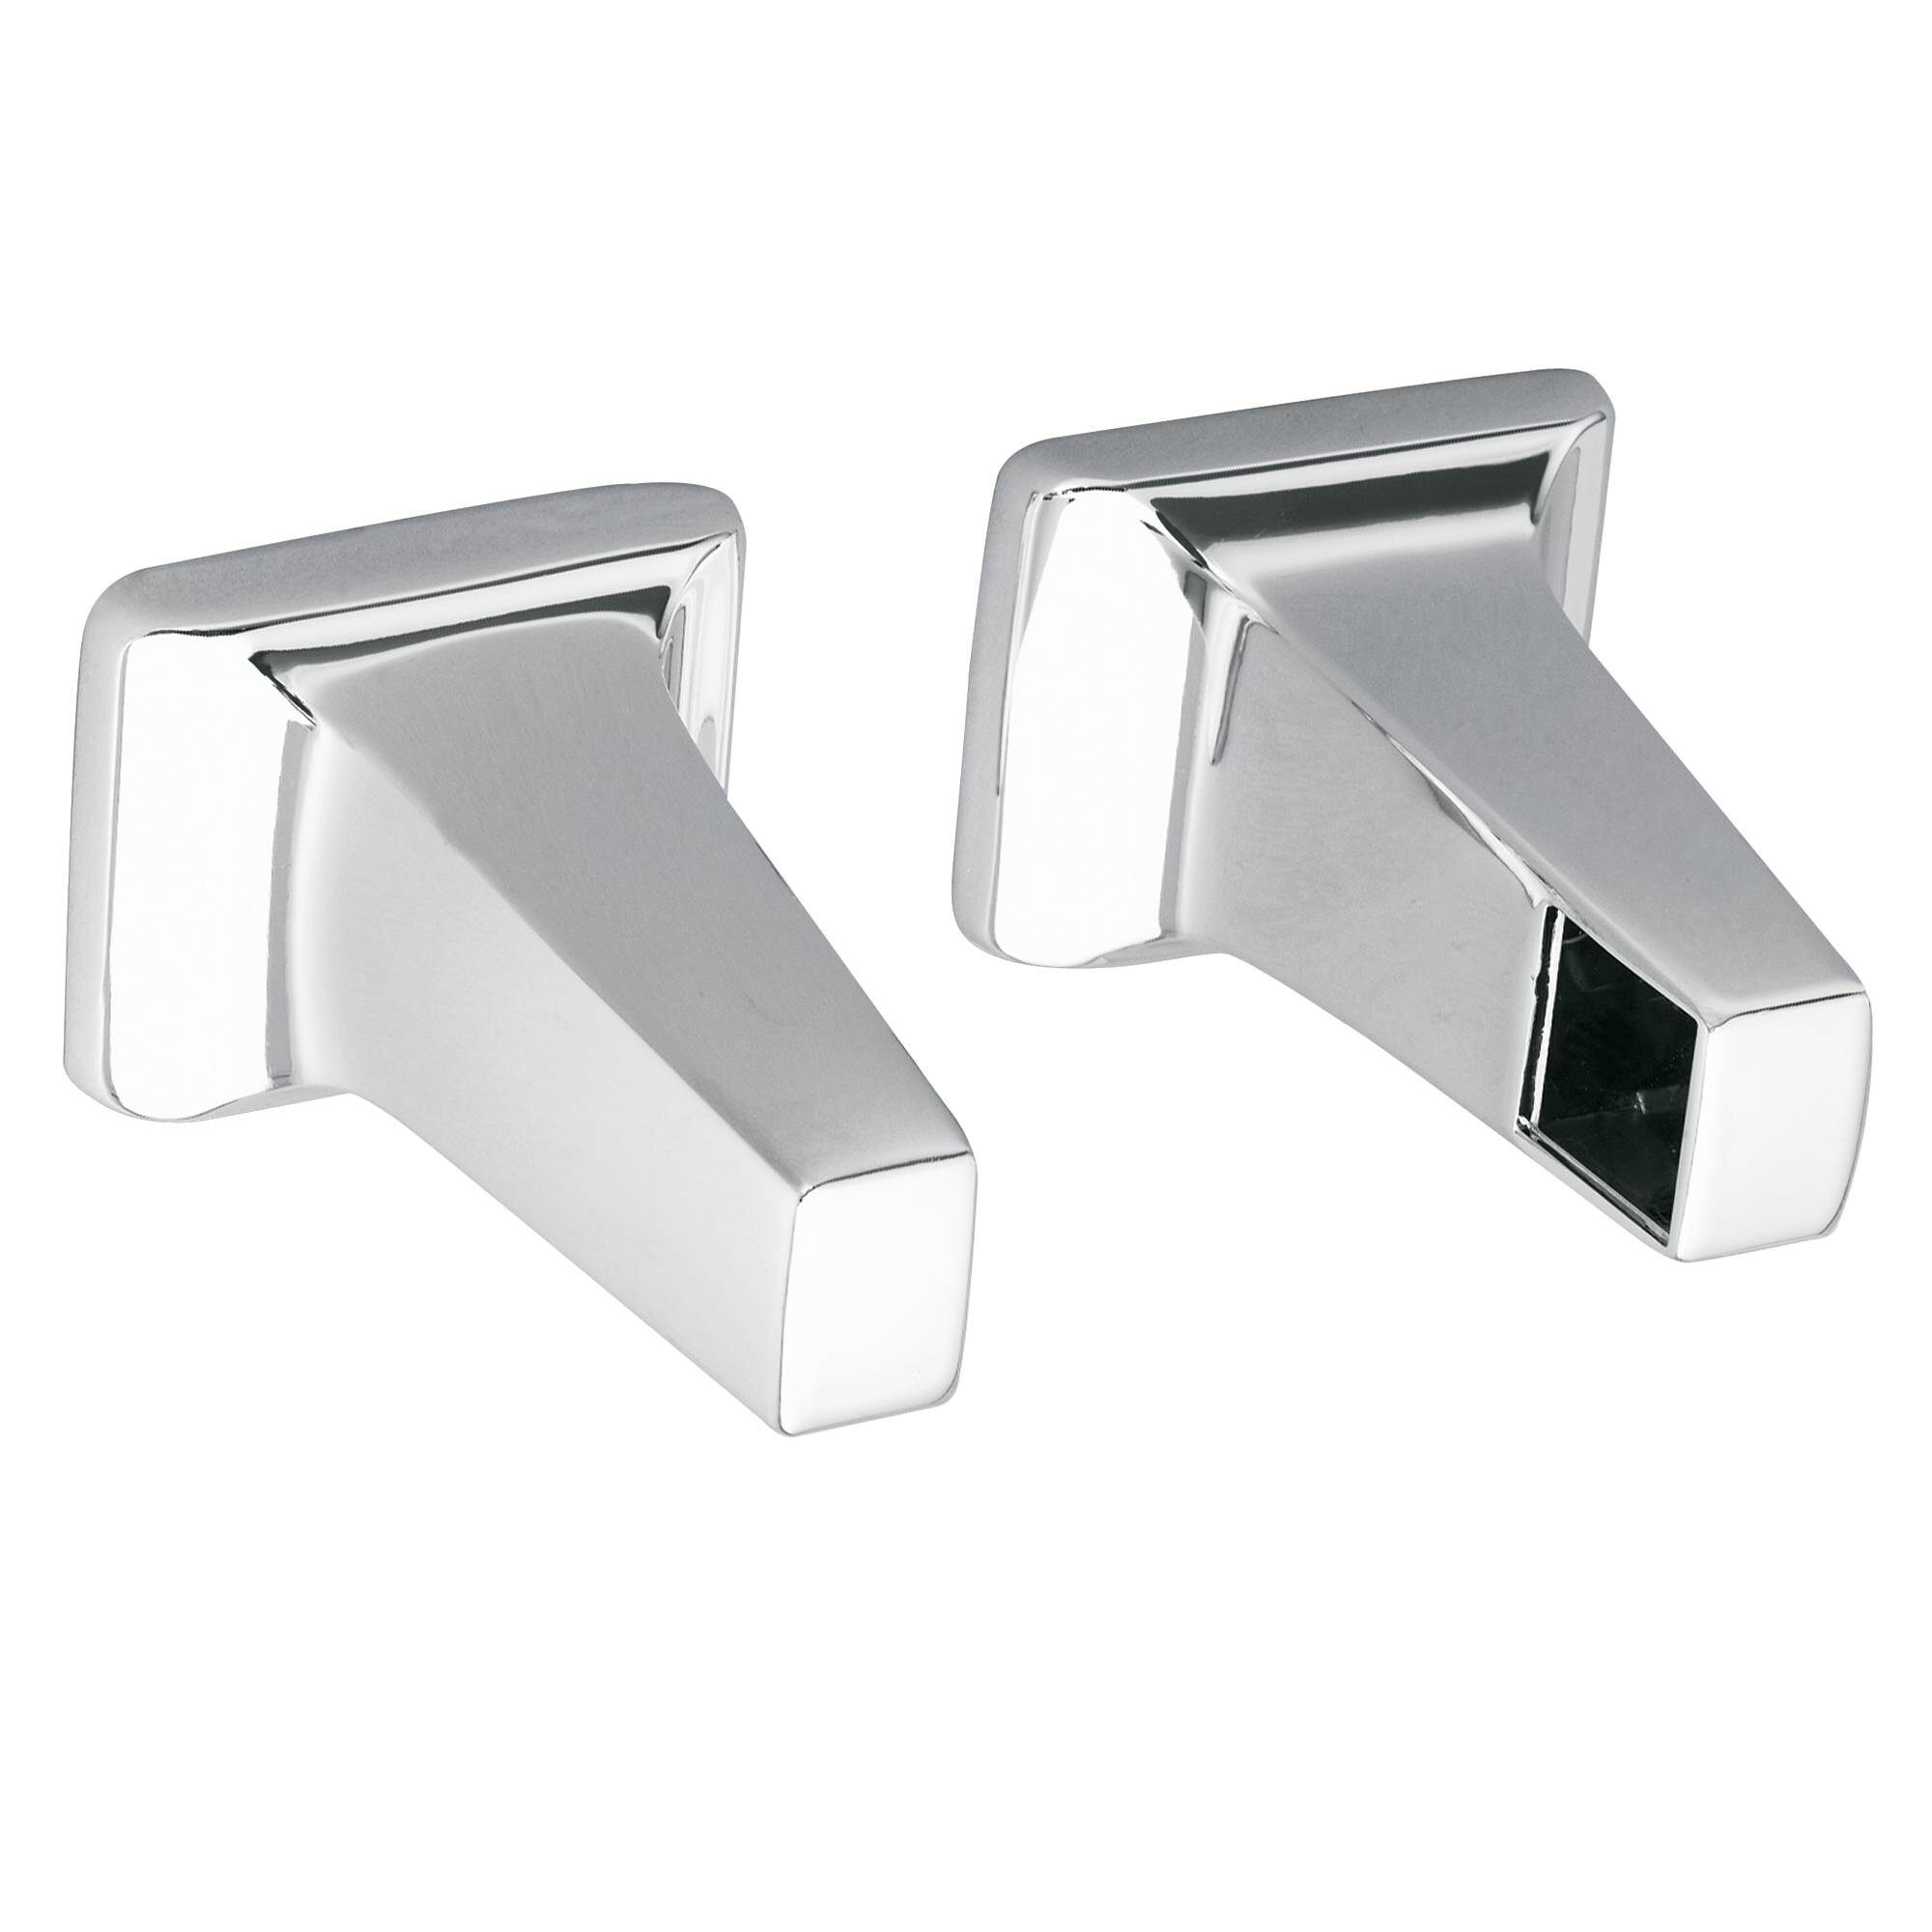 Details about   NEW In Box Moen Towel Bar Hooks contains 2 Hooks CHROME 